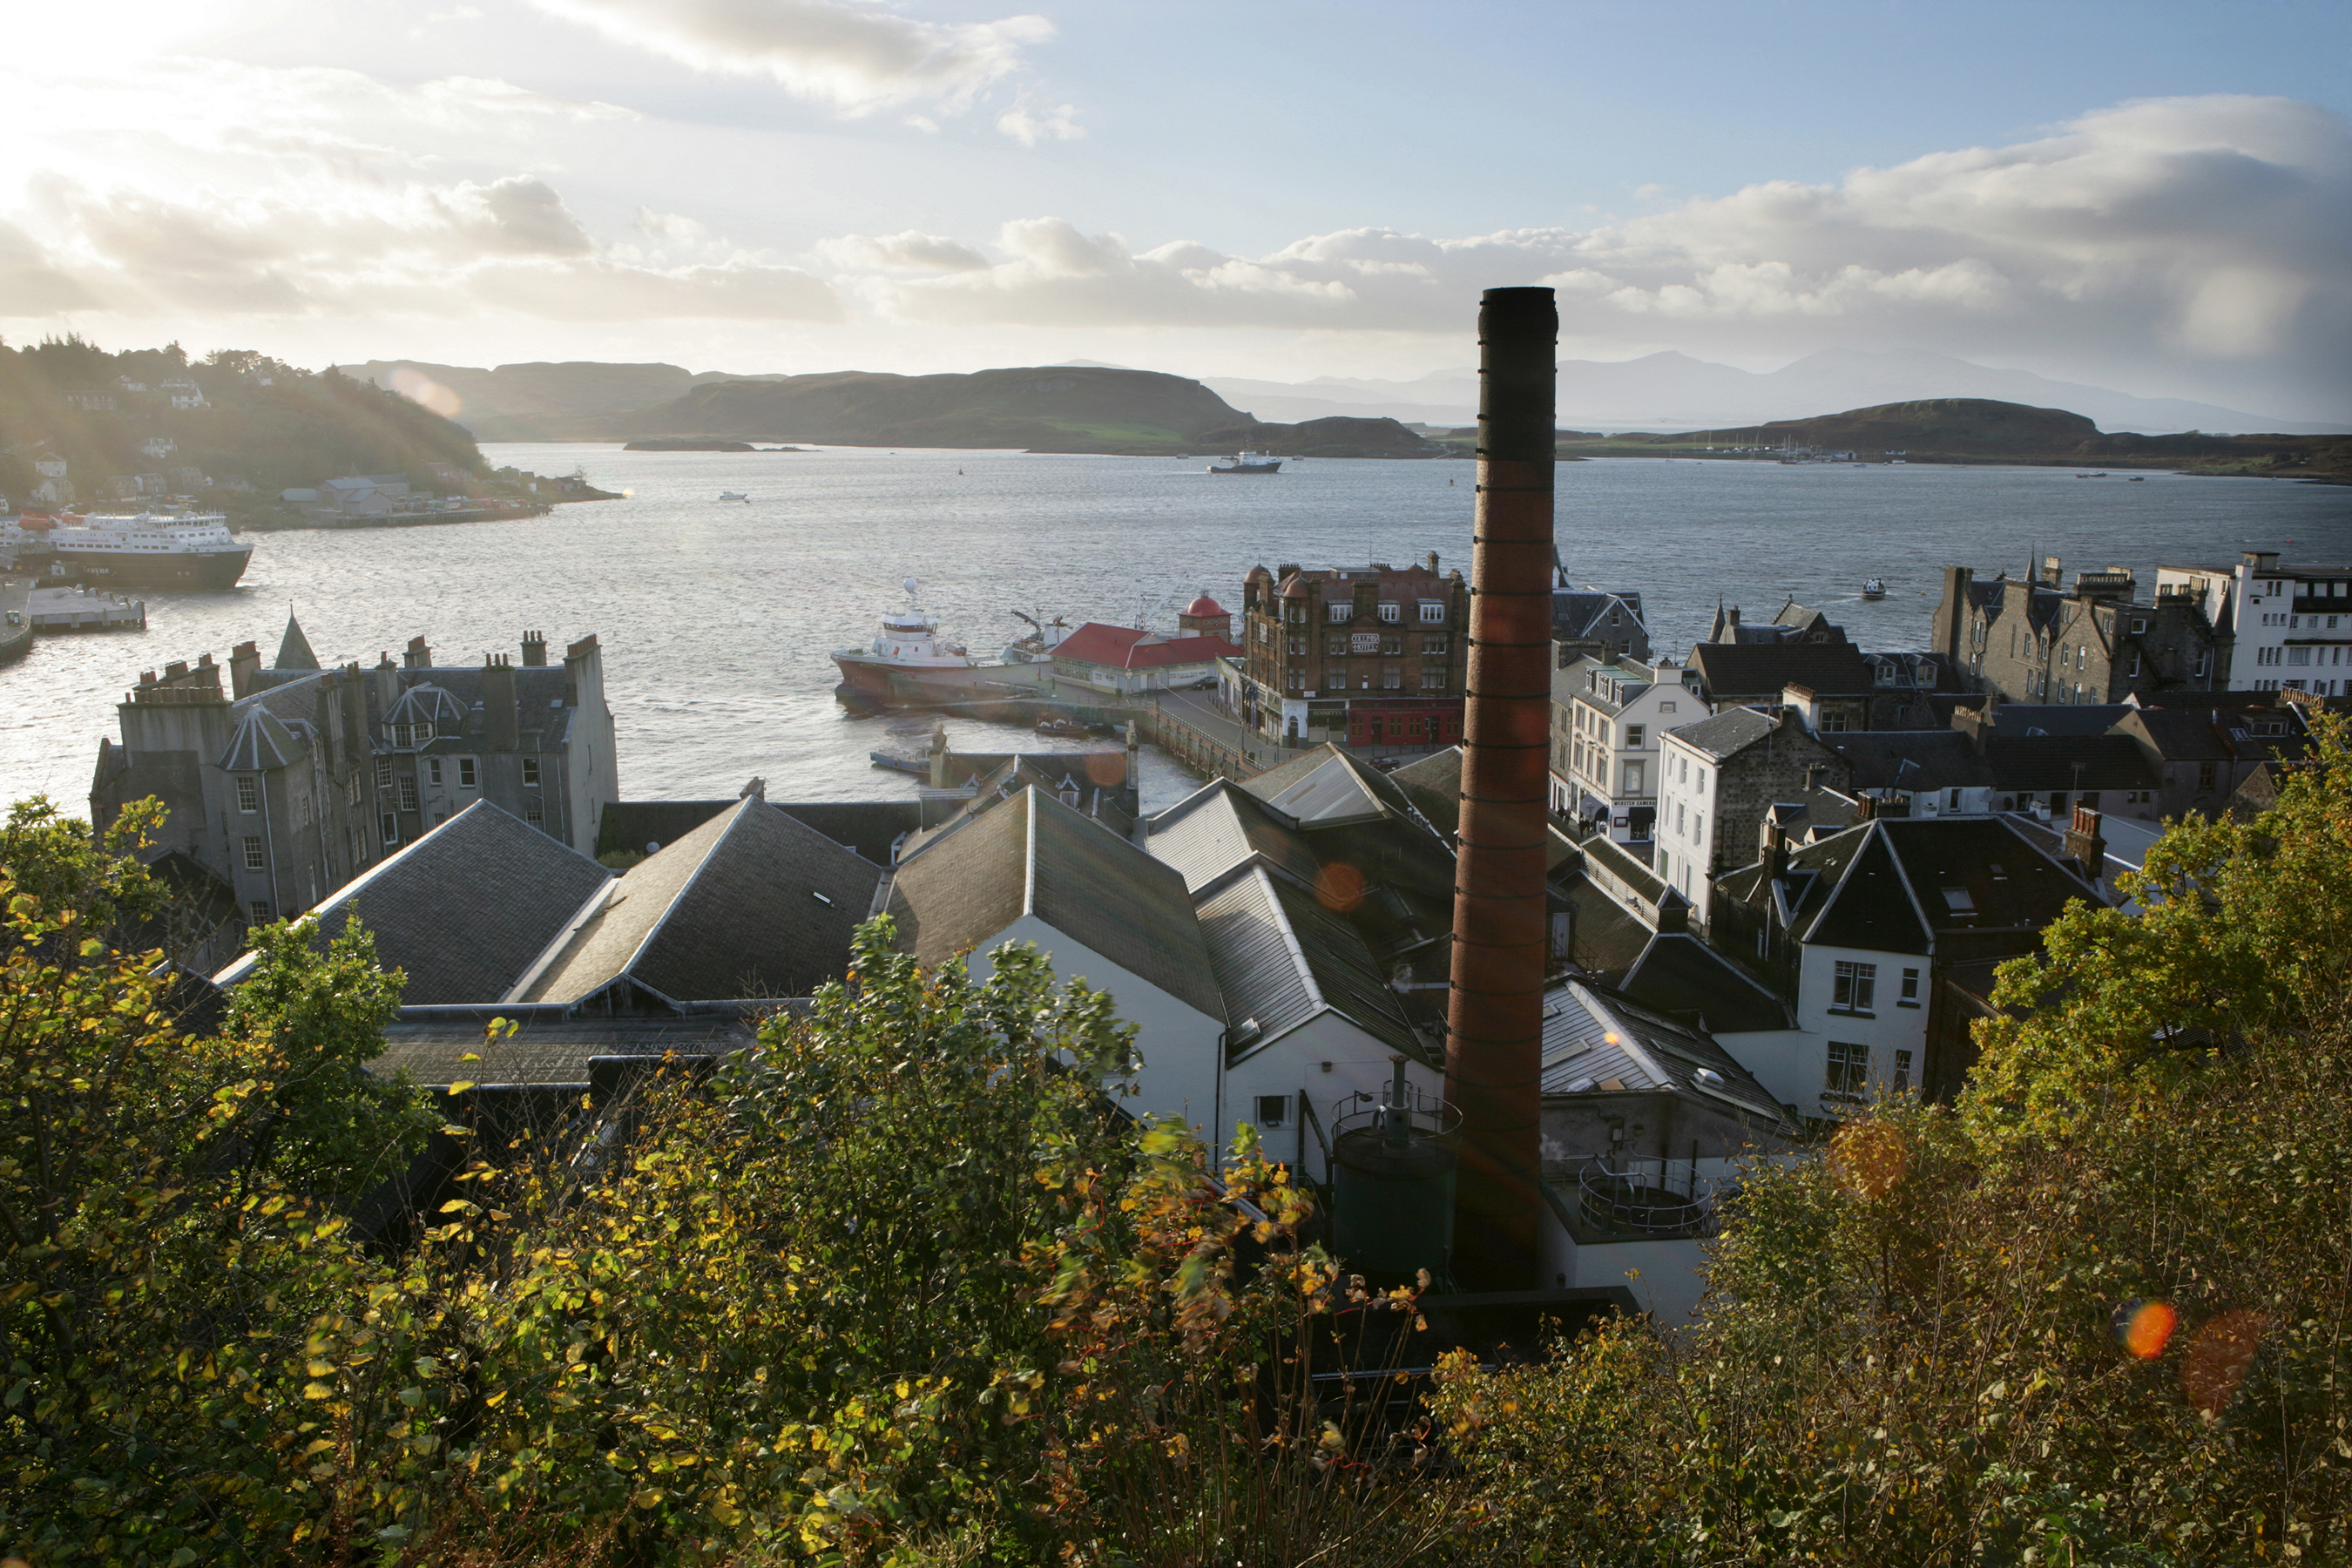 Postcards from Oban will quench your wanderlust through unique and immersive experiences of the town, distillery and people you have yet to meet.